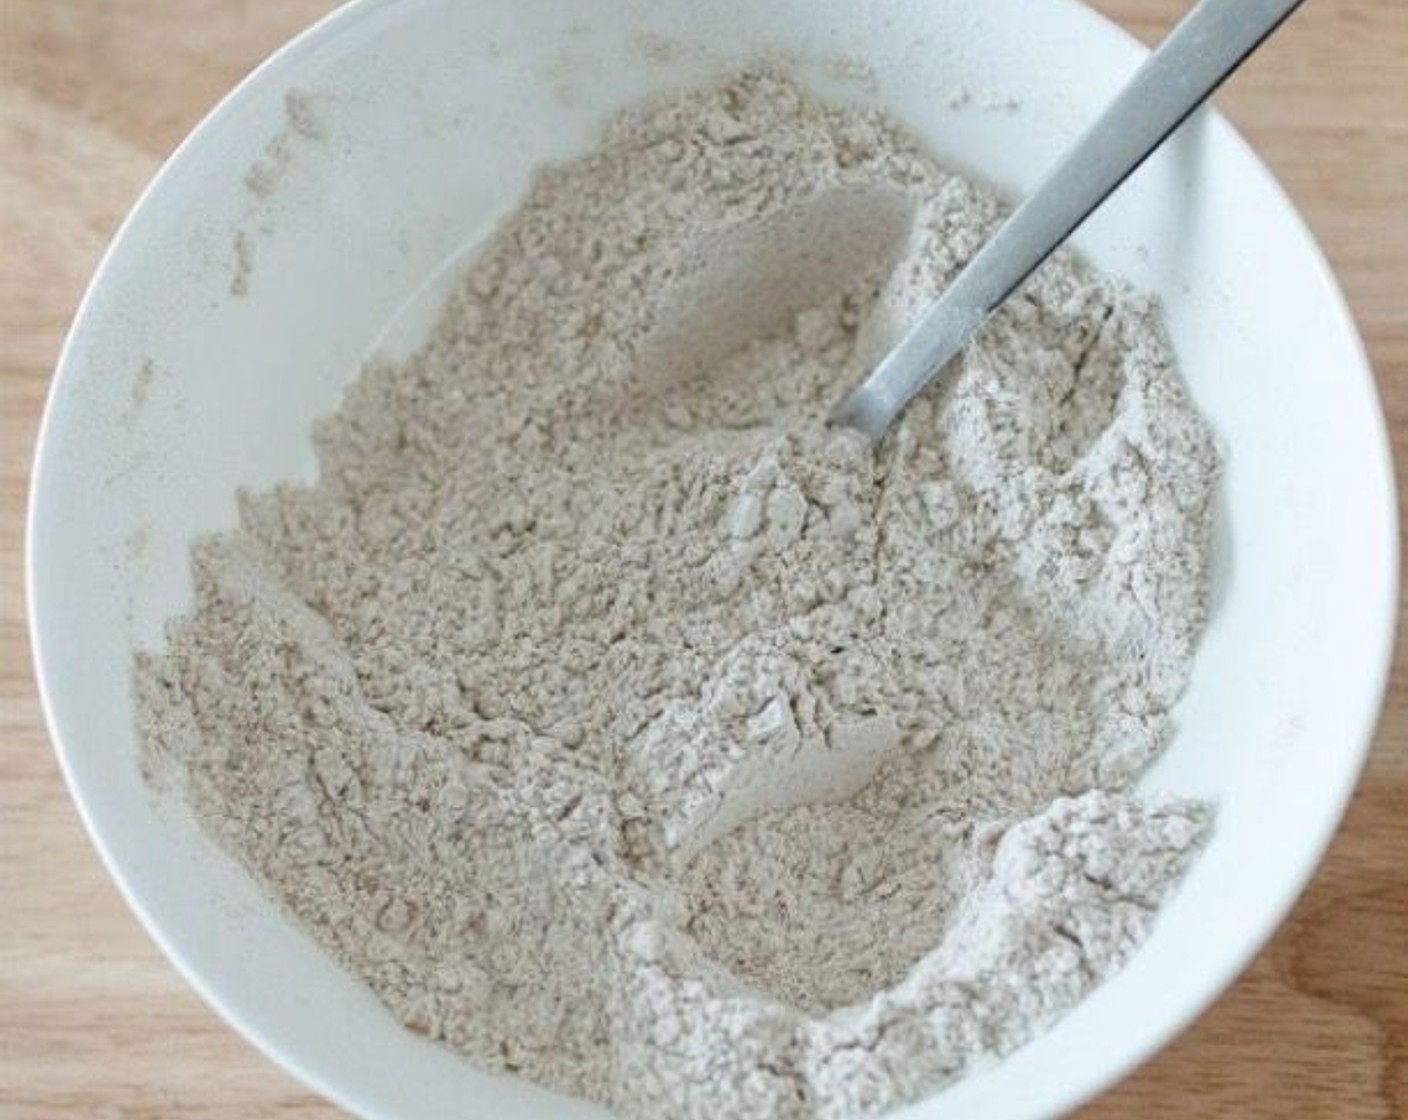 step 1 Combine All-Purpose Flour (1 2/3 cups), Baking Powder (1/2 Tbsp), {@11:}, {@13:}, Ground Ginger (1 tsp), Onion Powder (1 tsp), Granulated Sugar (1 tsp), Dried Oregano (1/2 tsp), Dried Marjoram (1/2 tsp), {@10:}, {@12:}, Ground Allspice (1/2 tsp), Ground Black Pepper (1 tsp), {@14:}, and Chili Powder (1 tsp) in a mixing bowl, then mix well.